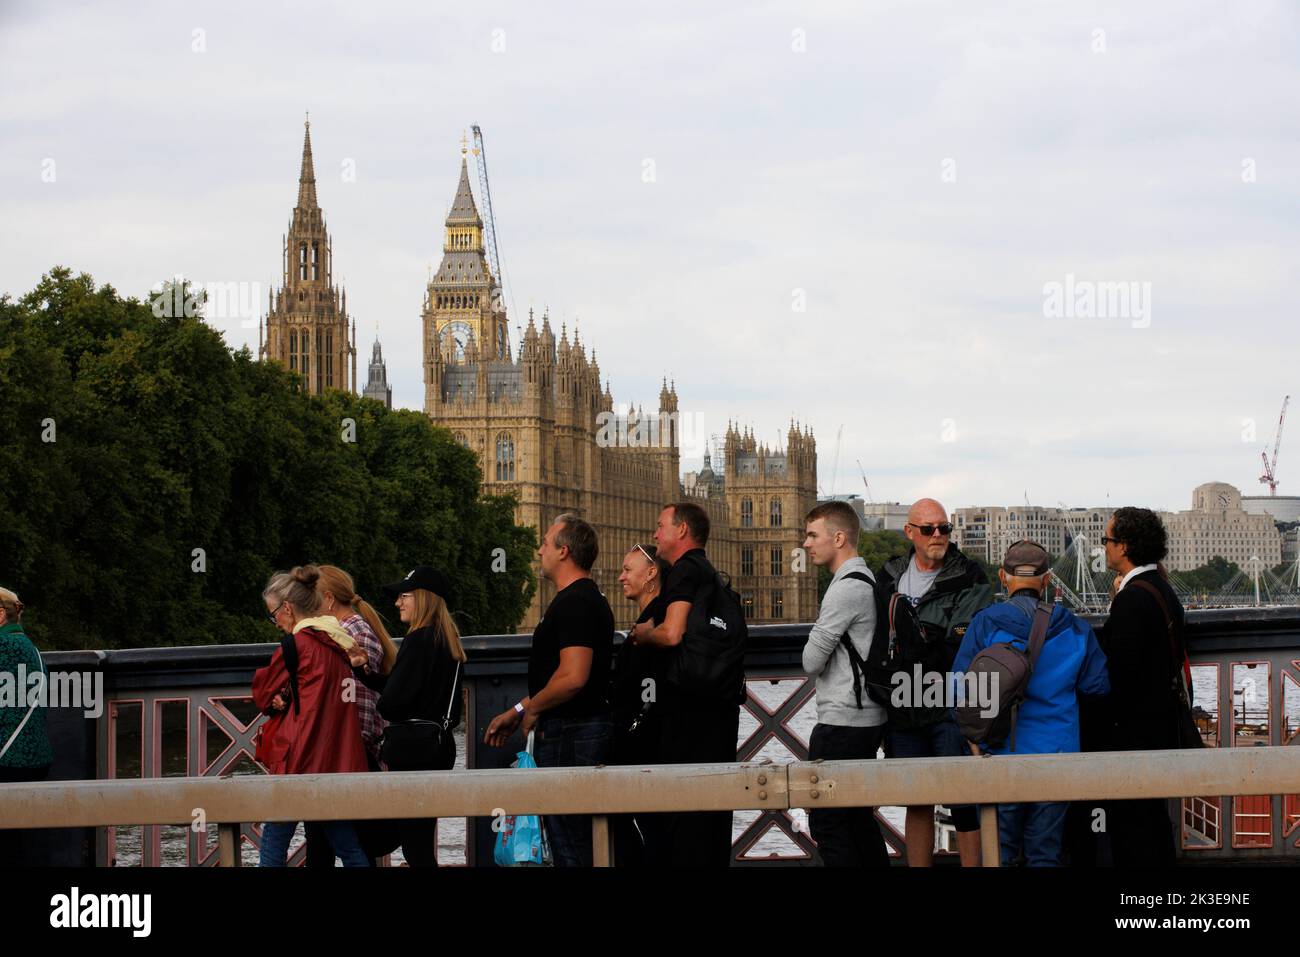 A queue has formed to allow members of the public to walk past Queen Elizabeth II’s coffin as the late monarch lies in state at Westminster Hall. The Stock Photo